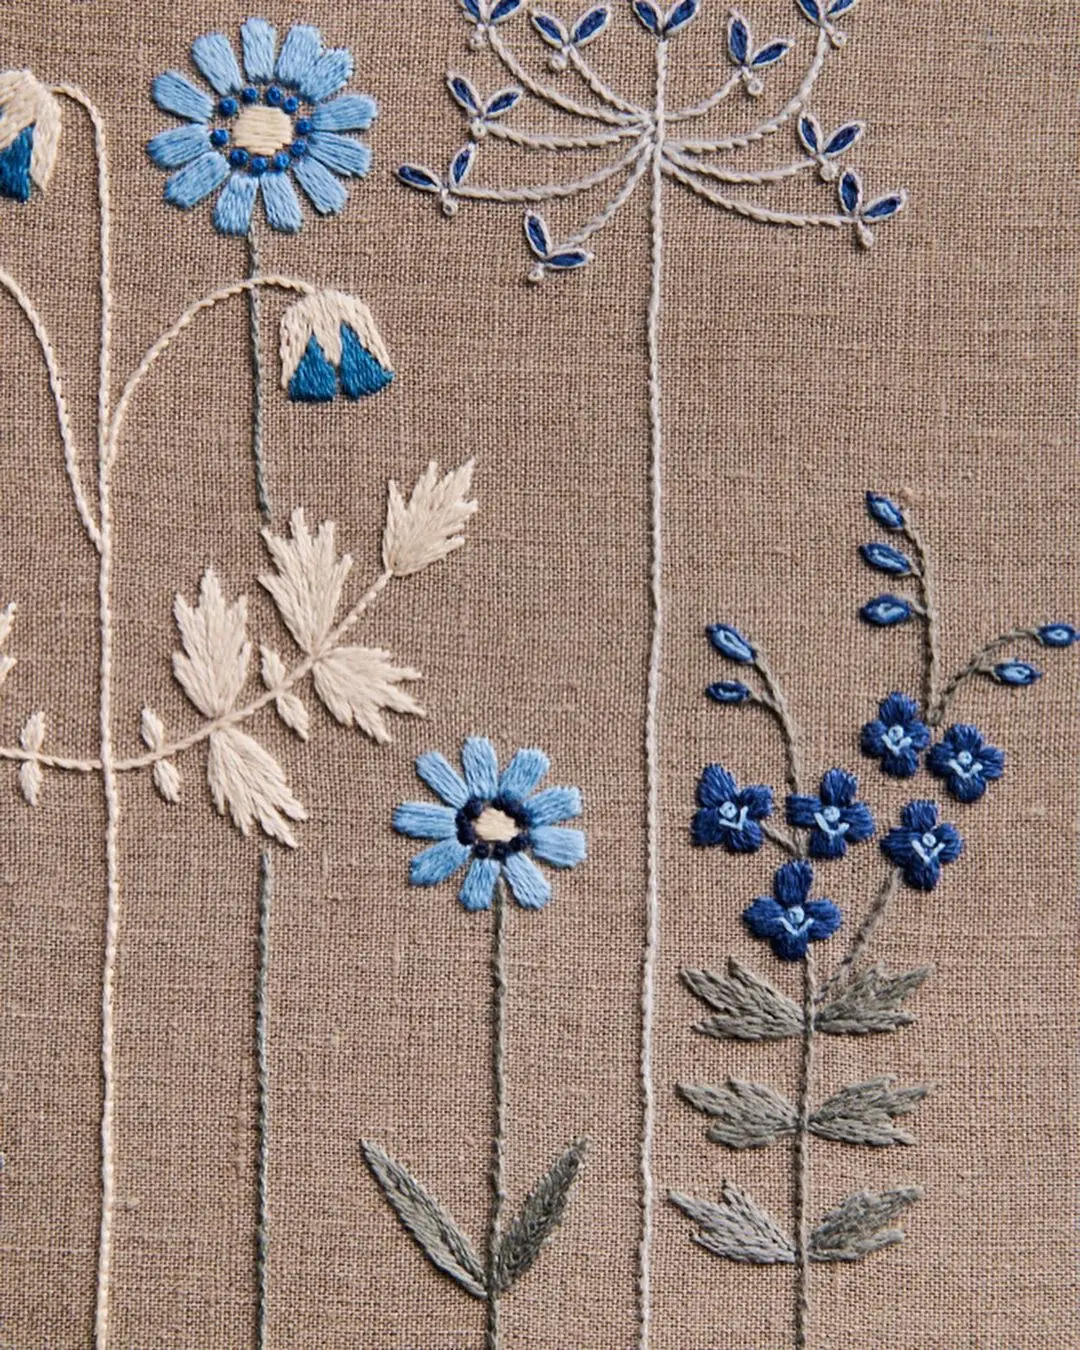 Embroidery flowers pattern